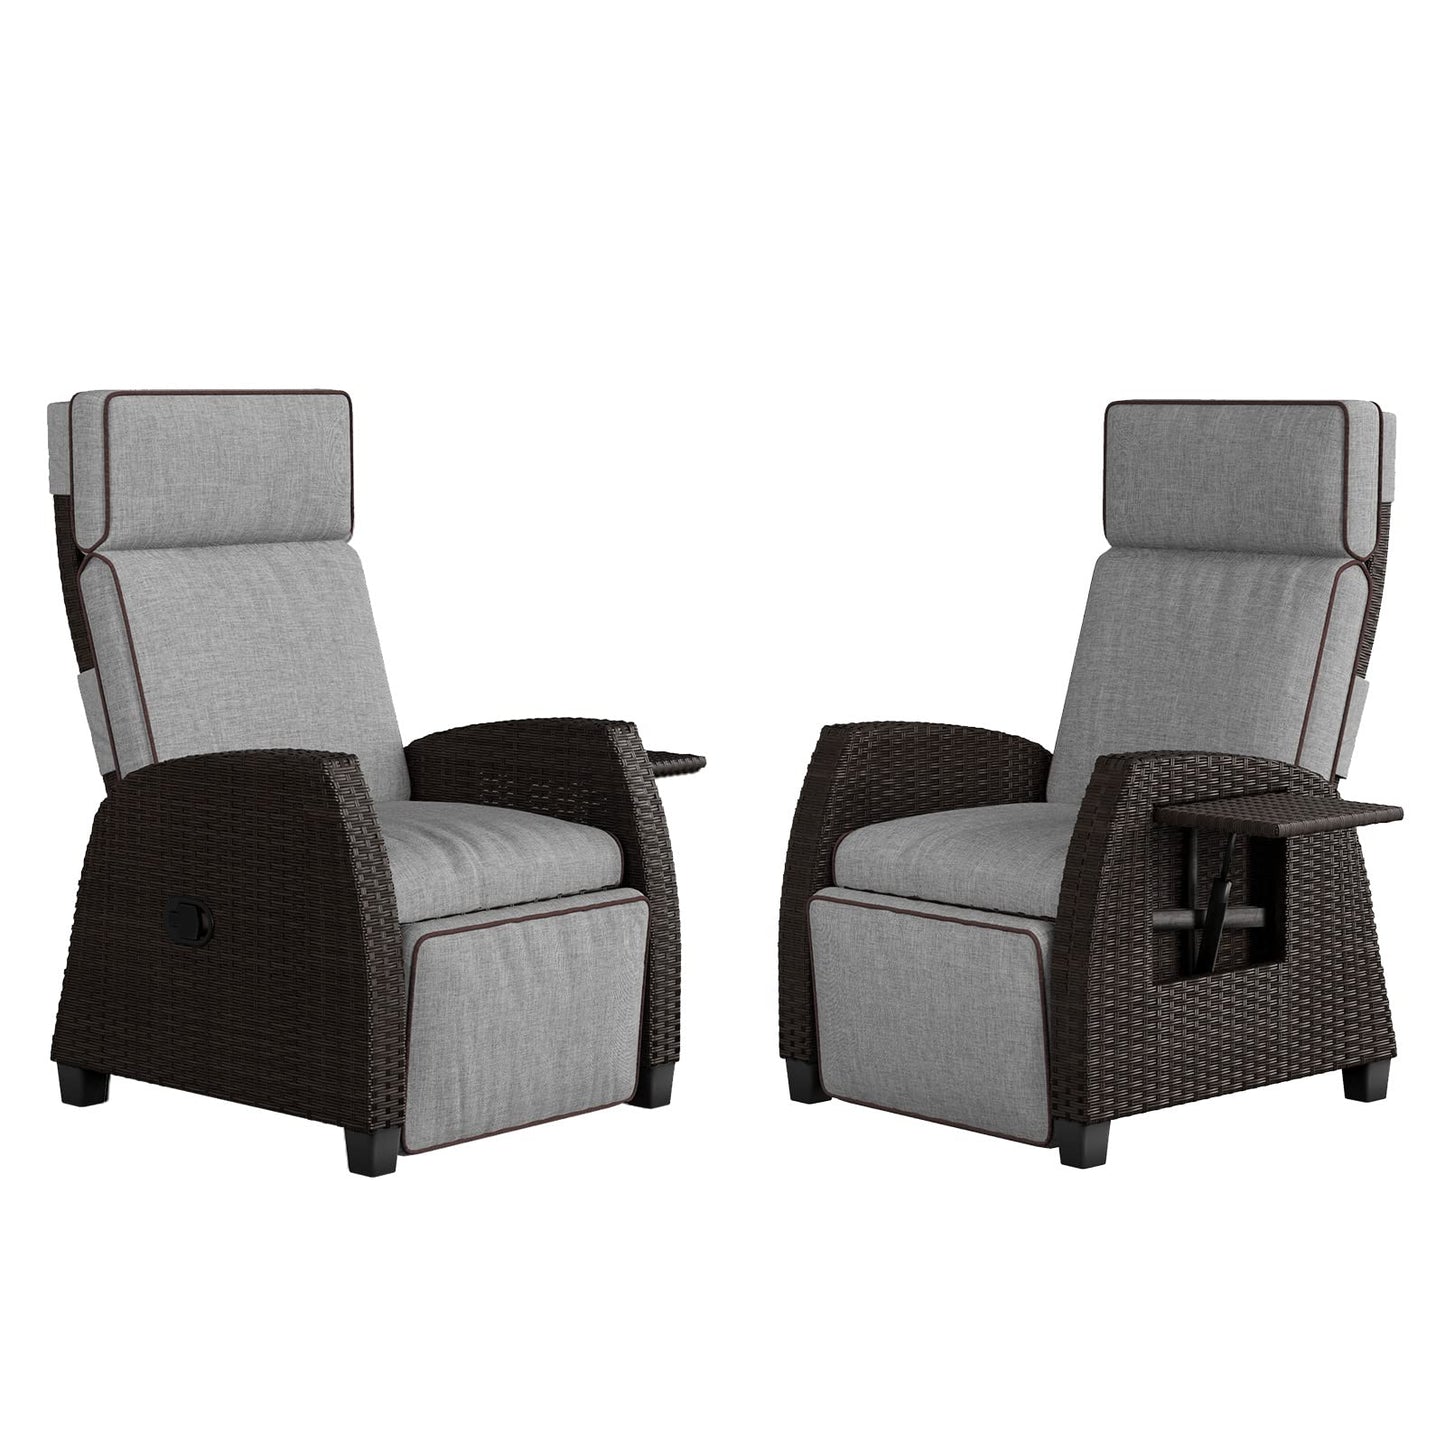 Grand patio Outdoor Recliners Set of 2 Patio Recliner Chair, All-Weather Wicker Reclining Patio Chairs, Flip-up Side Table, Recliner Chair, Cool Grey Cool Grey 2pcs 2 PCS